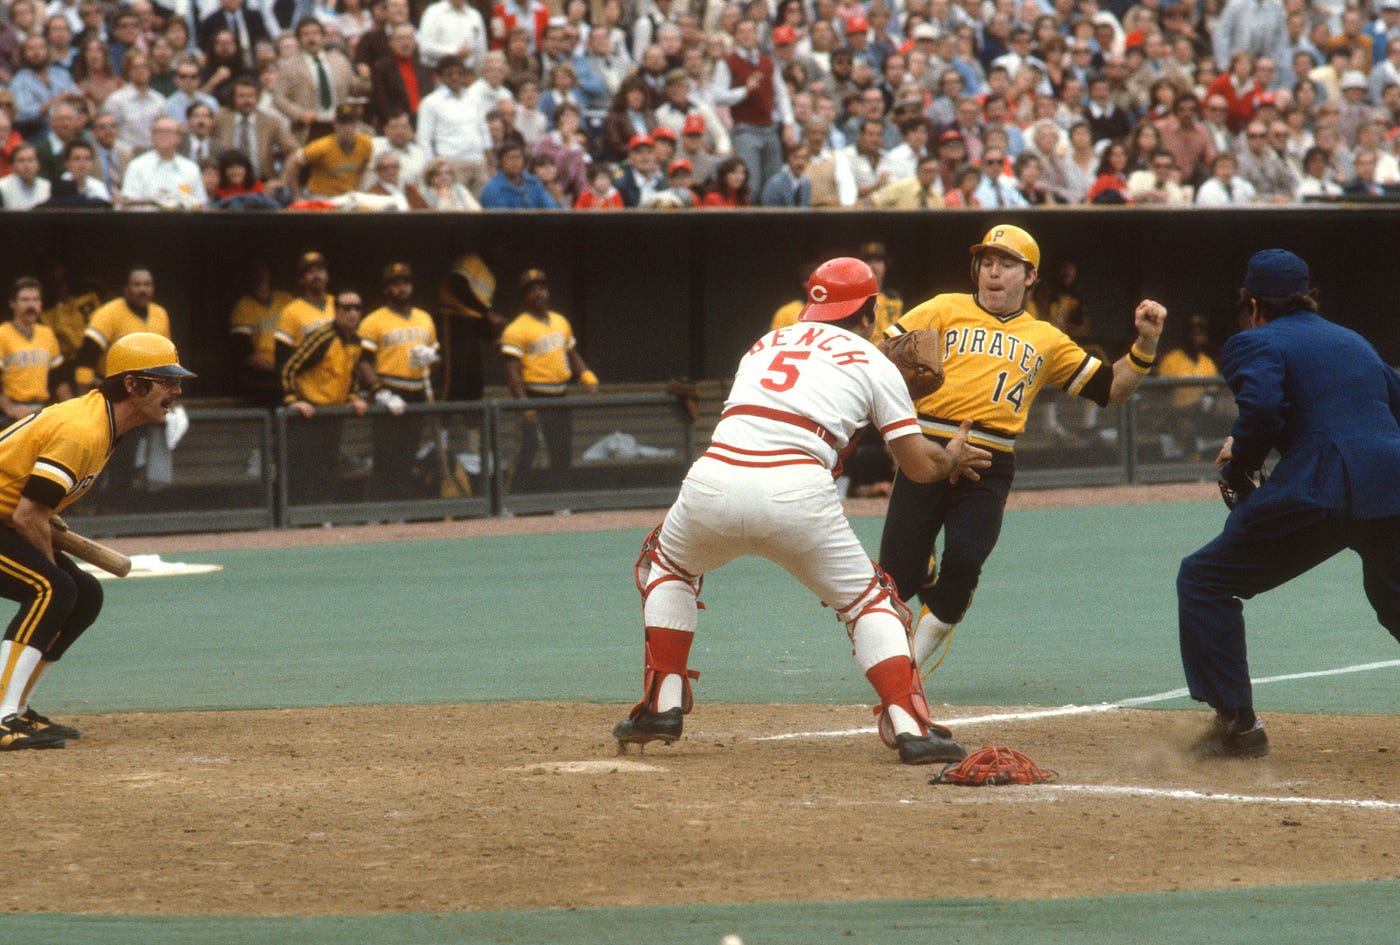 A great story.This date in Reds history, 5/4/1975, Dave